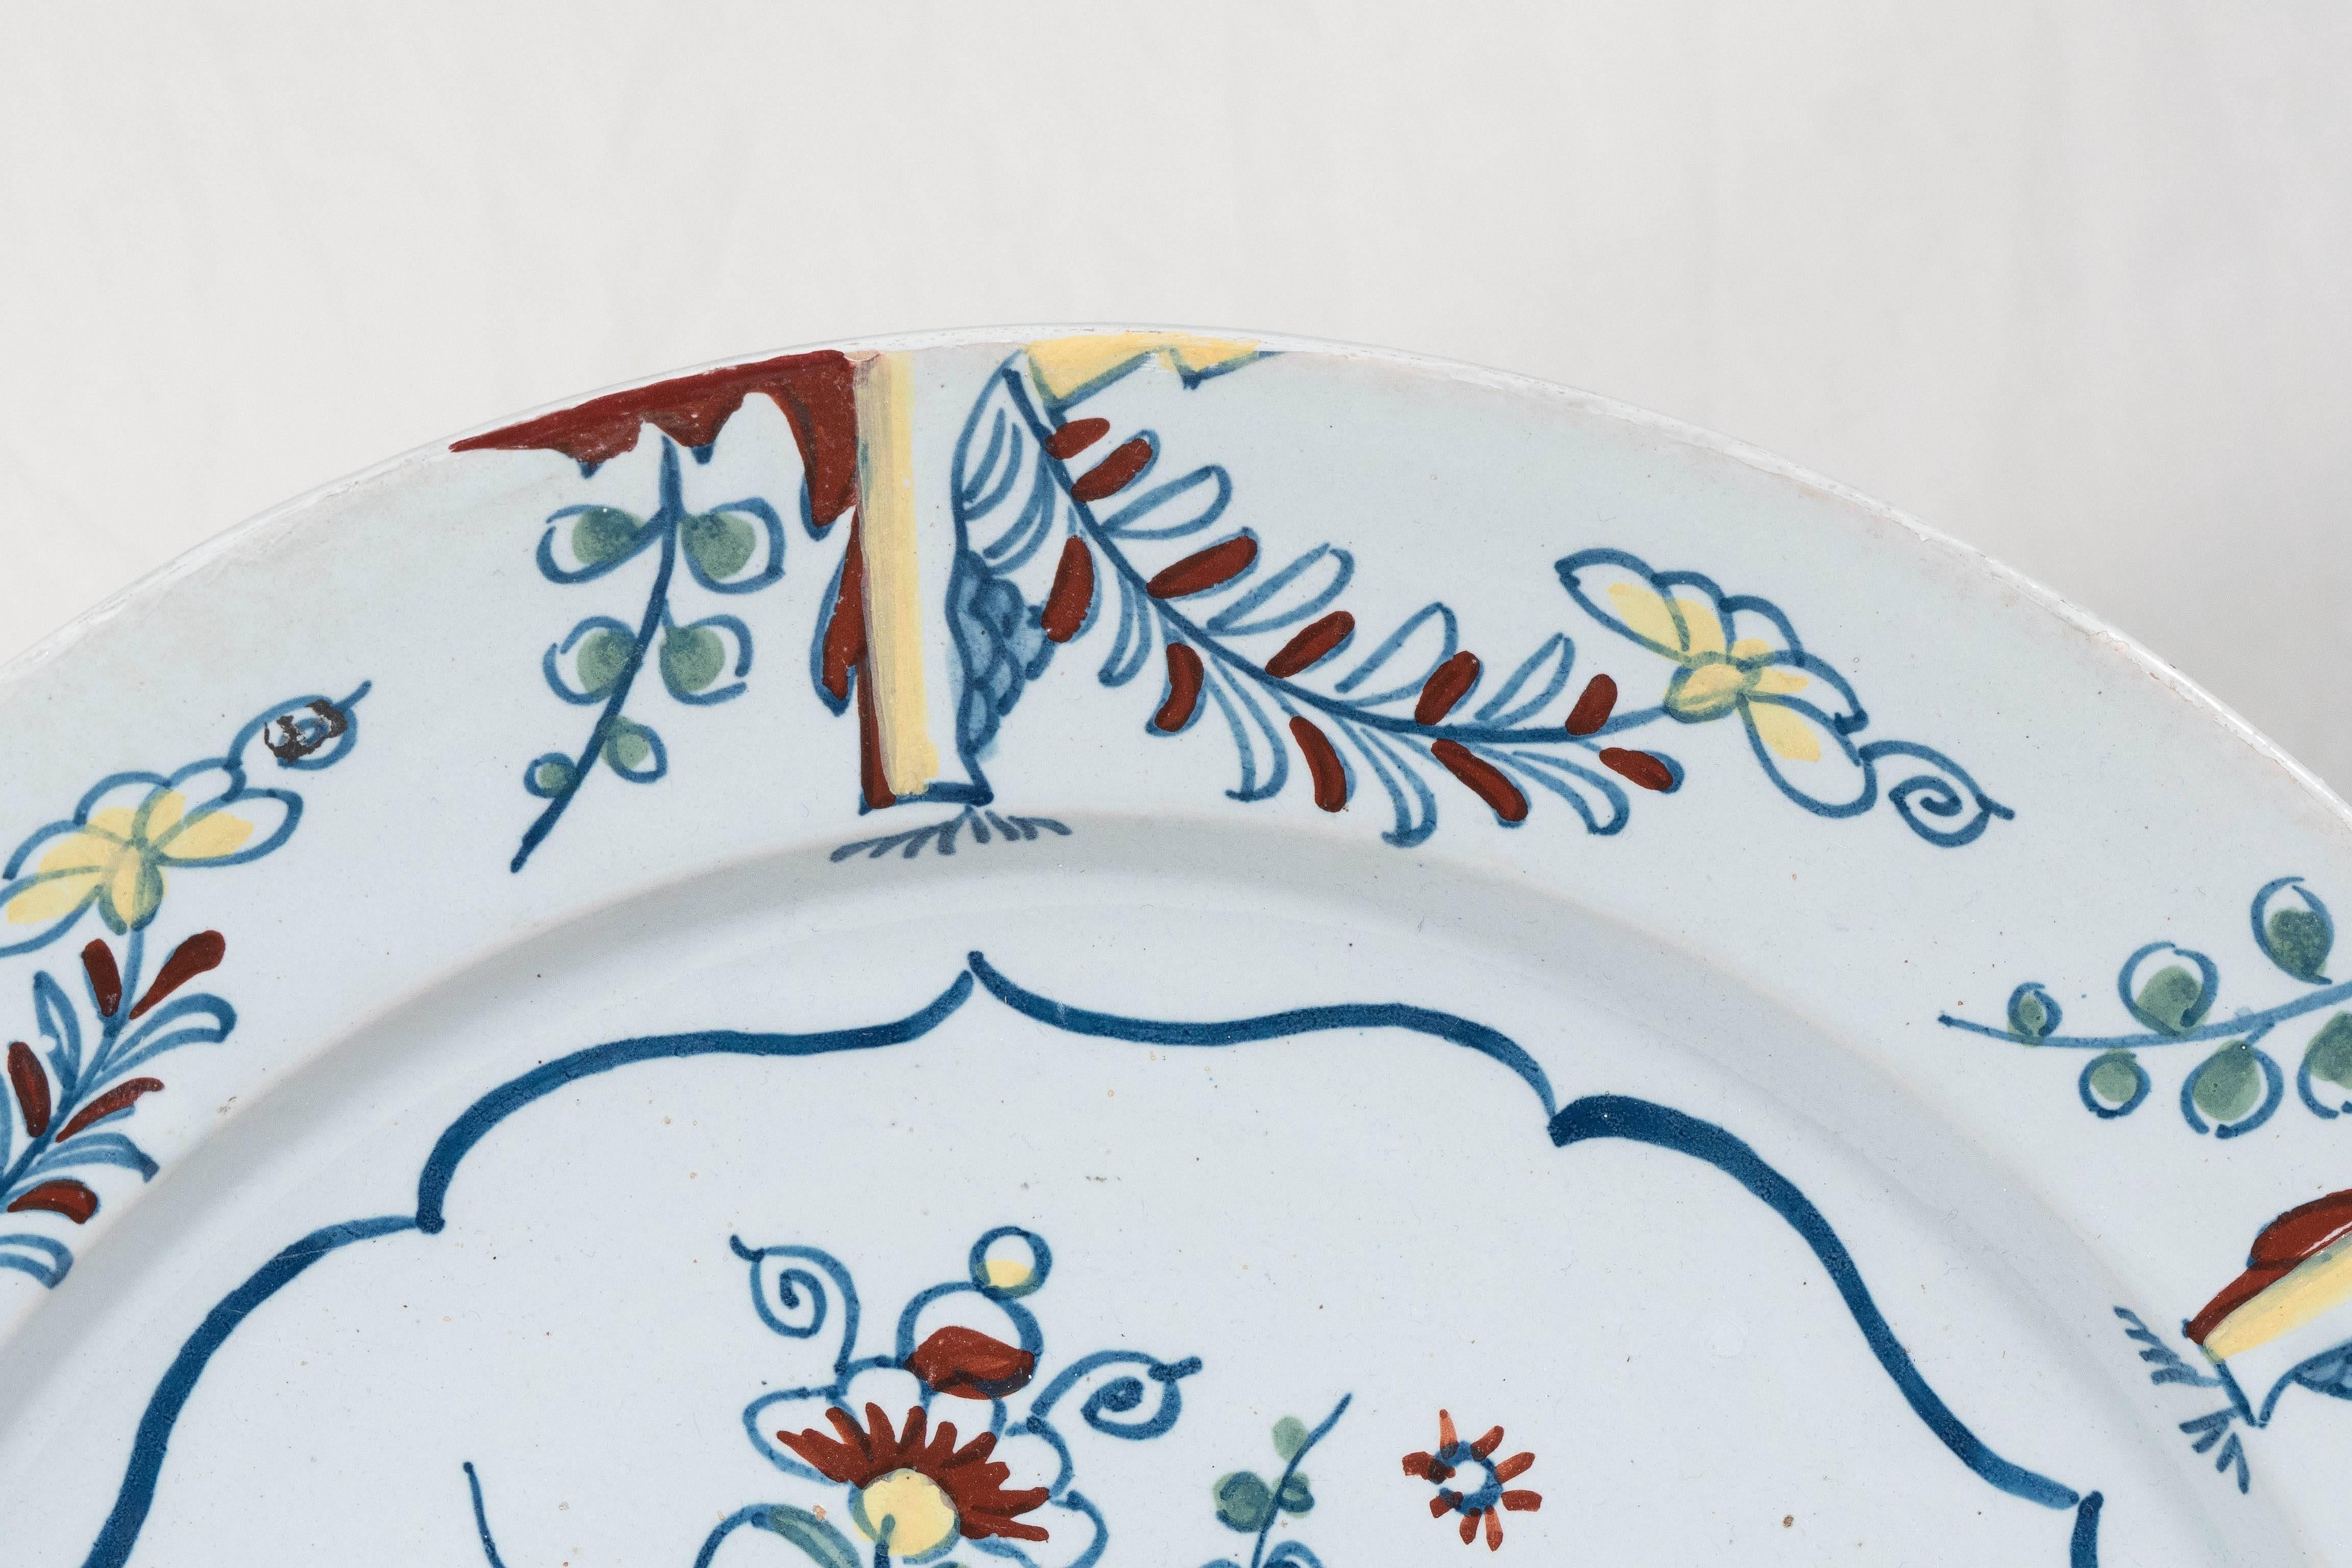 Hand-Painted Antique Bristol Delft Charger Painted in Polychrome Colors circa 1760